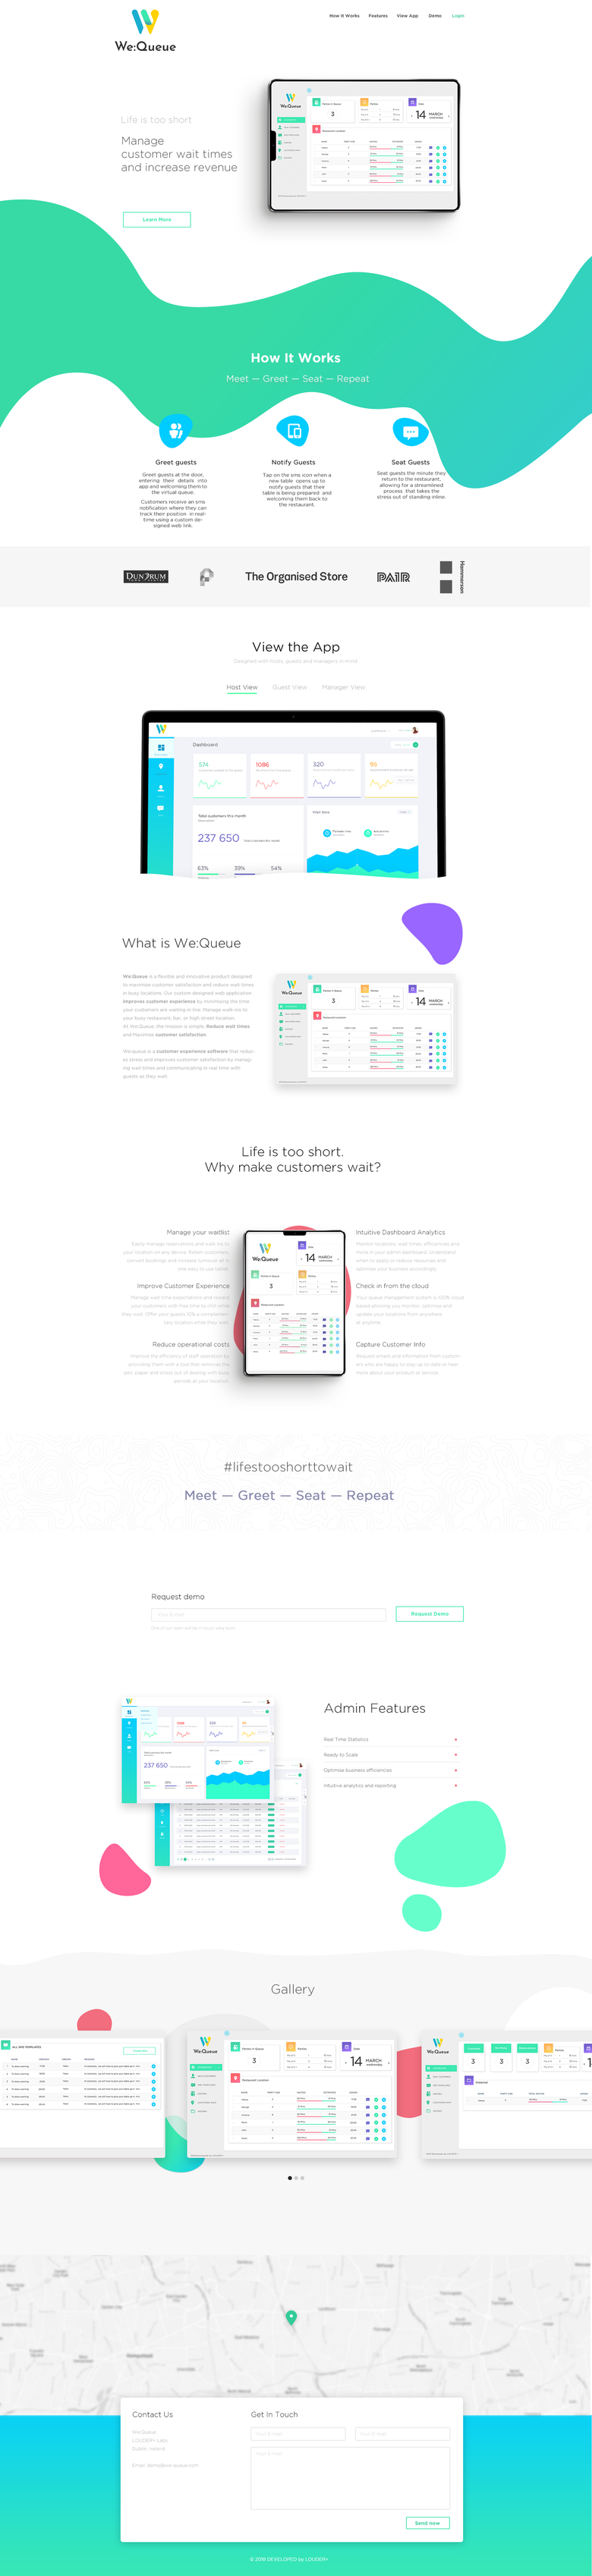 Landing page design and development